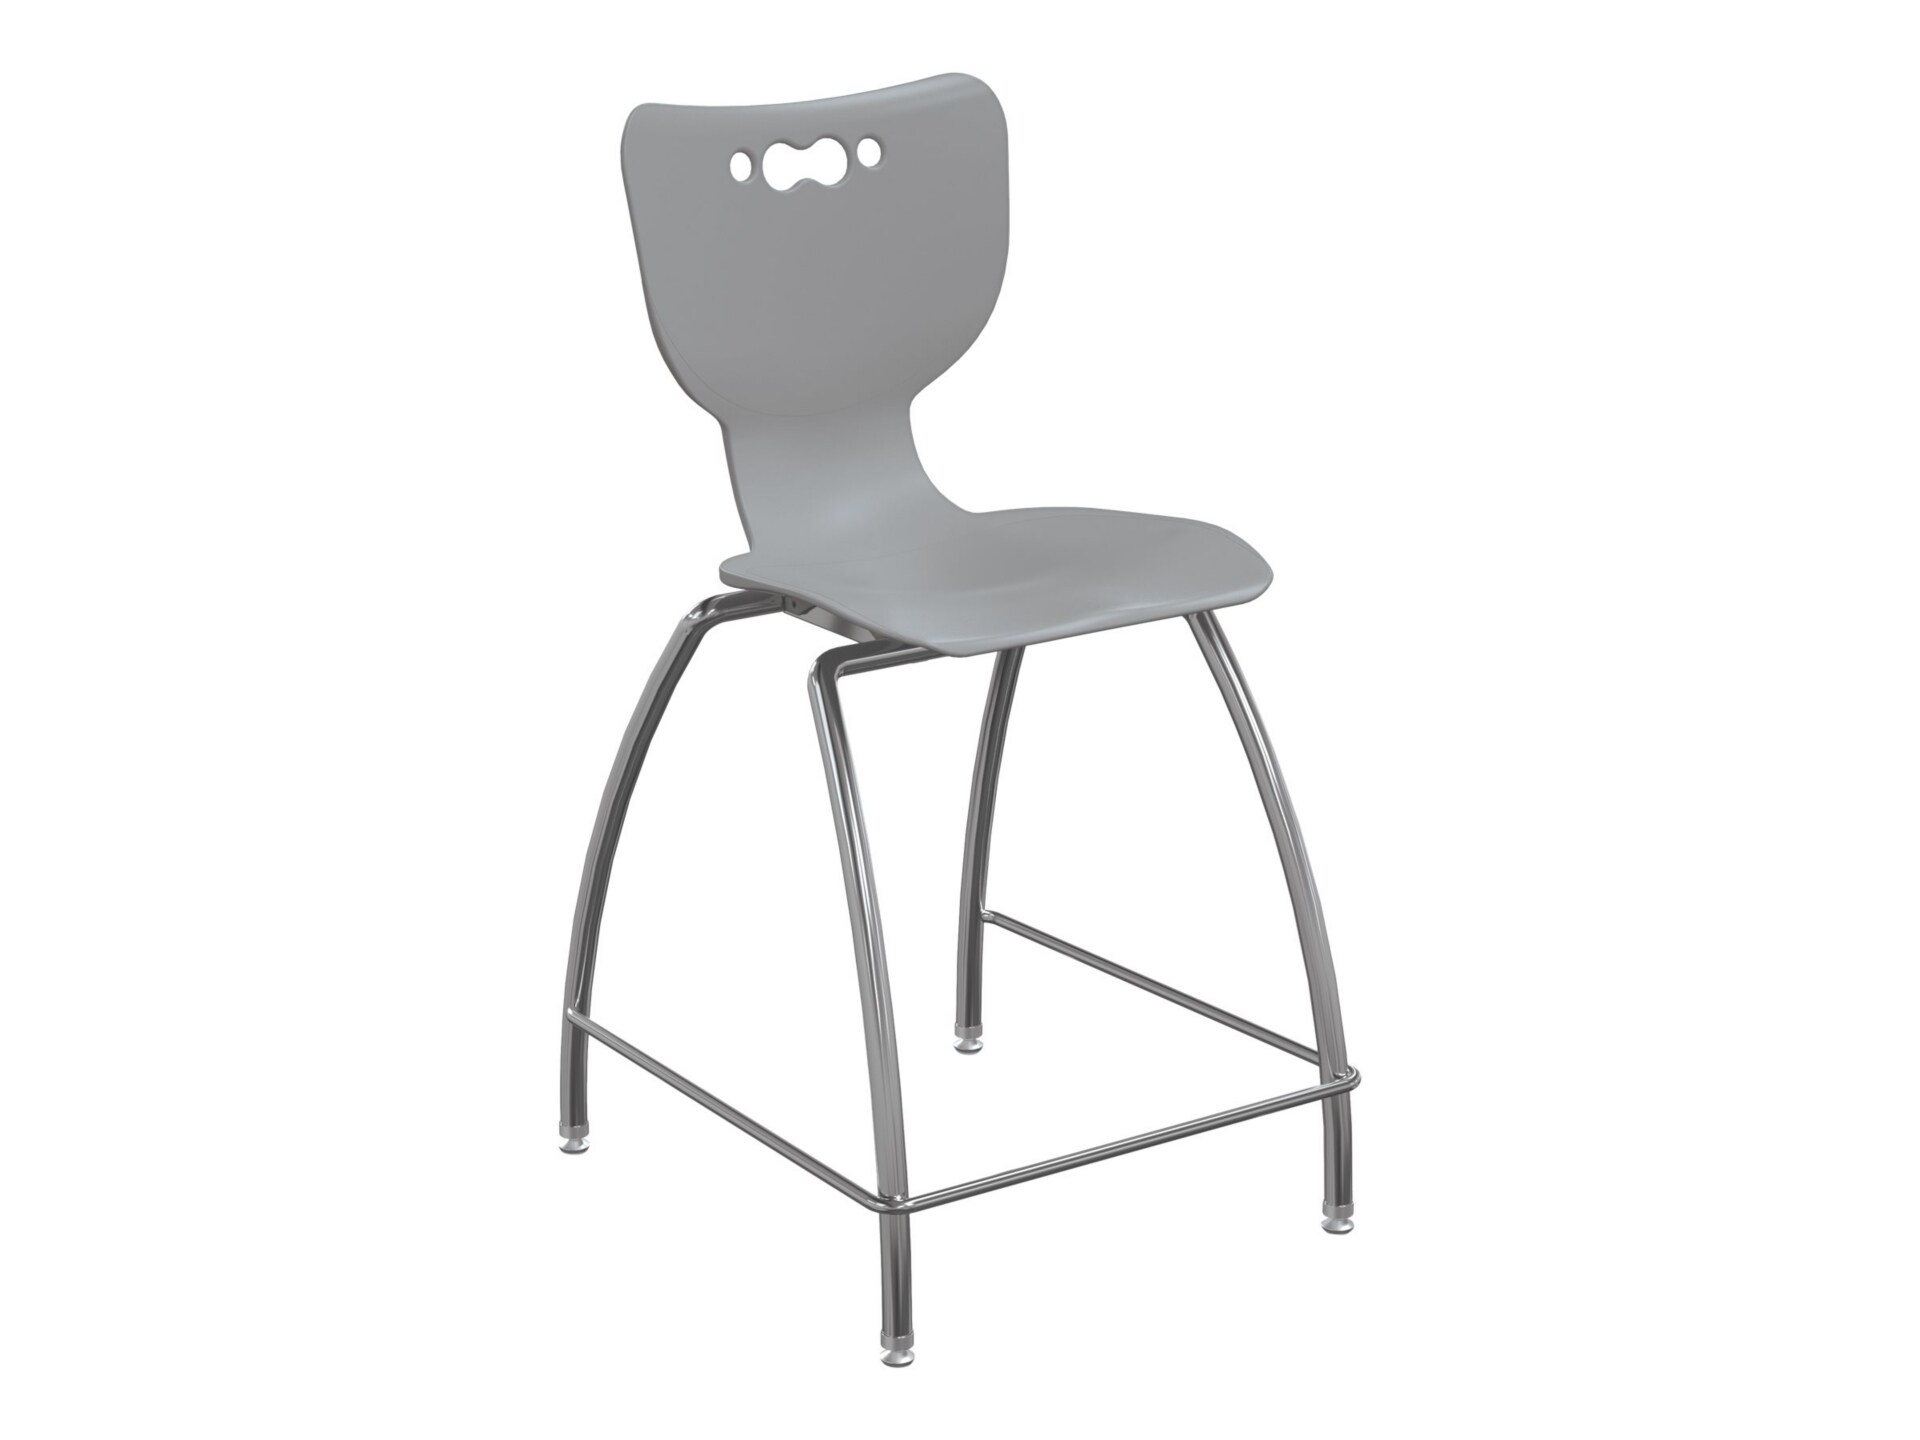 MooreCo Hierarchy - chair - chrome - gray